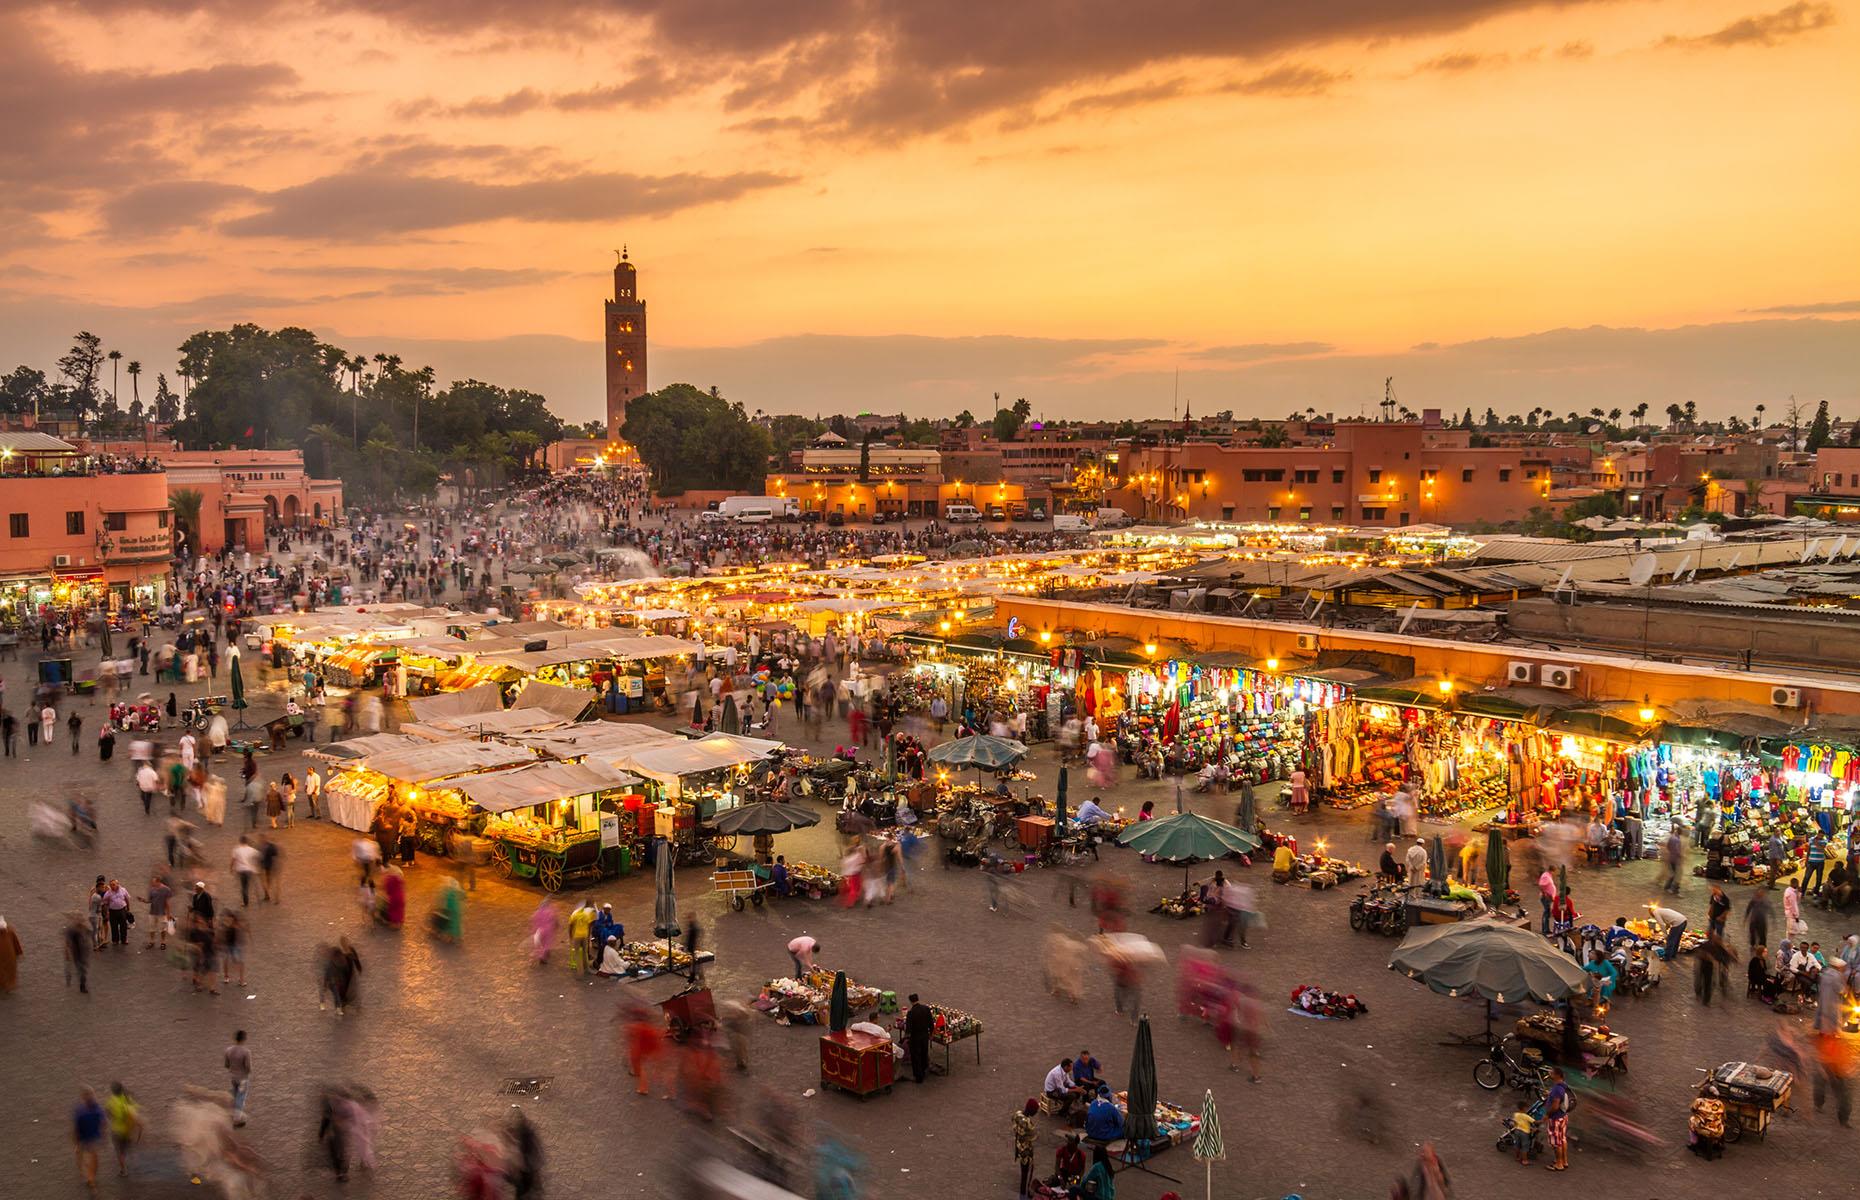 <p>Joyous and buoyant, <em>Marrakesh Express</em> by Crosby, Stills and Nash inspired a generation of travelers to ride the rickety train from Casablanca to Marrakech and immerse themselves in the color and chaos of Jemaa el-Fna square (pictured). Today, Marrakech is reached by the high speed Al Atlas train – no ducks and pigs and chickens as referred to in the song these days – but the appeal of the city remains the same, with colored cottons still hanging in the air and men charming cobras in the square.</p>